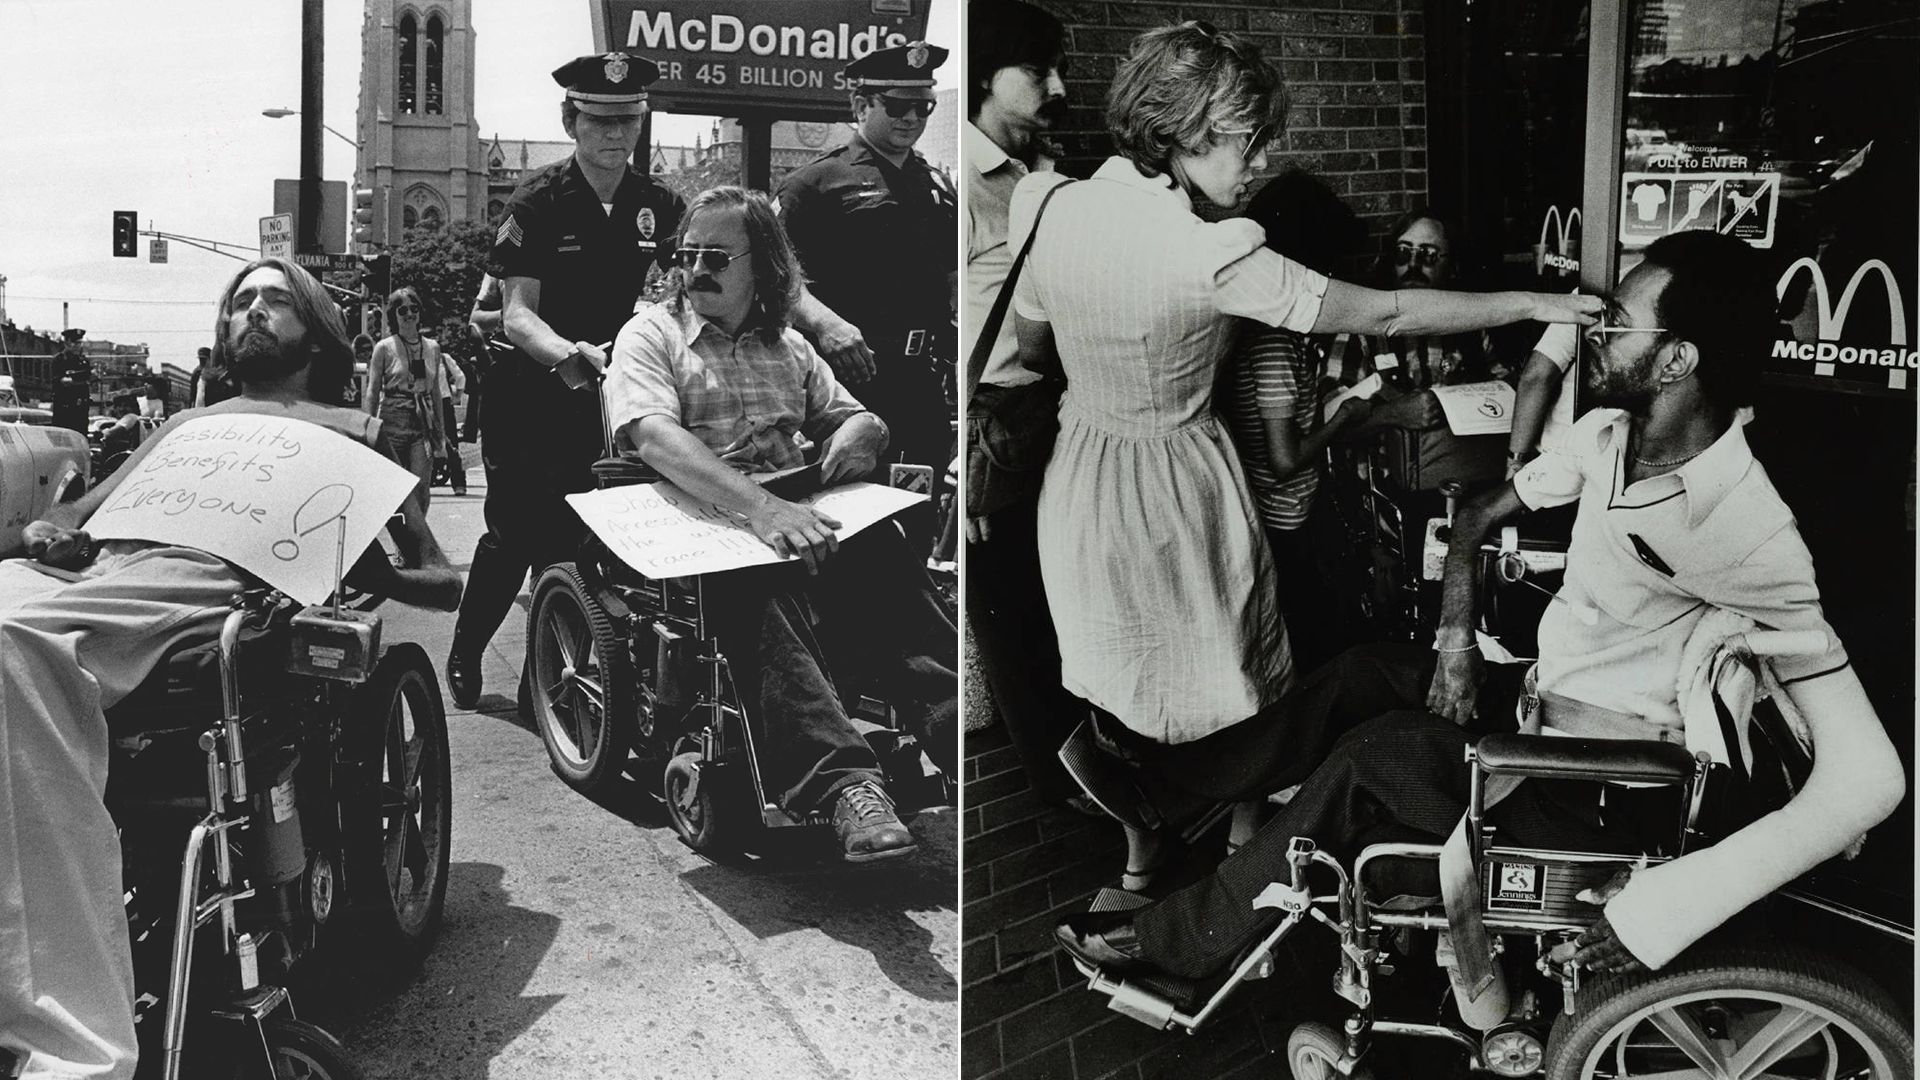 People in wheelchairs protest outside of a McDonald's restaurant.